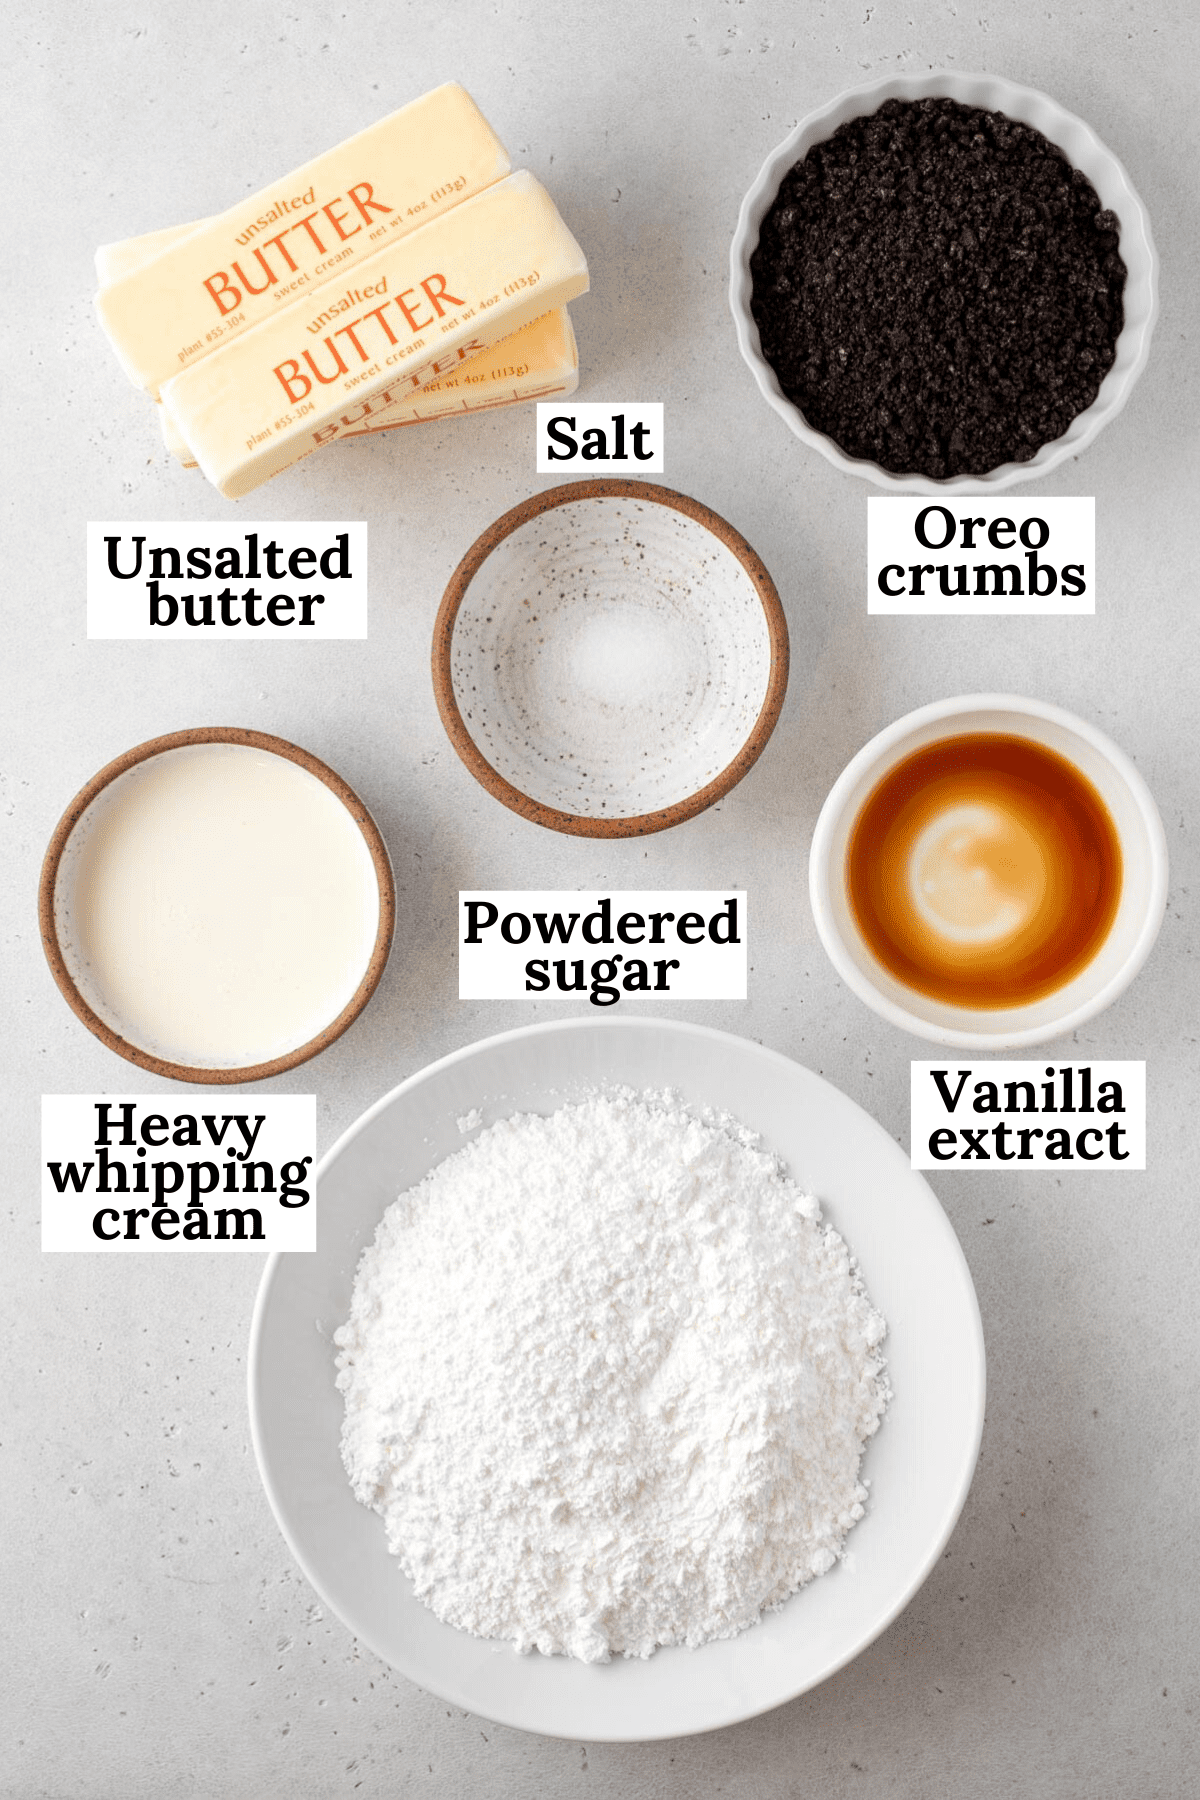 Overhead view of ingredients for Oreo frosting